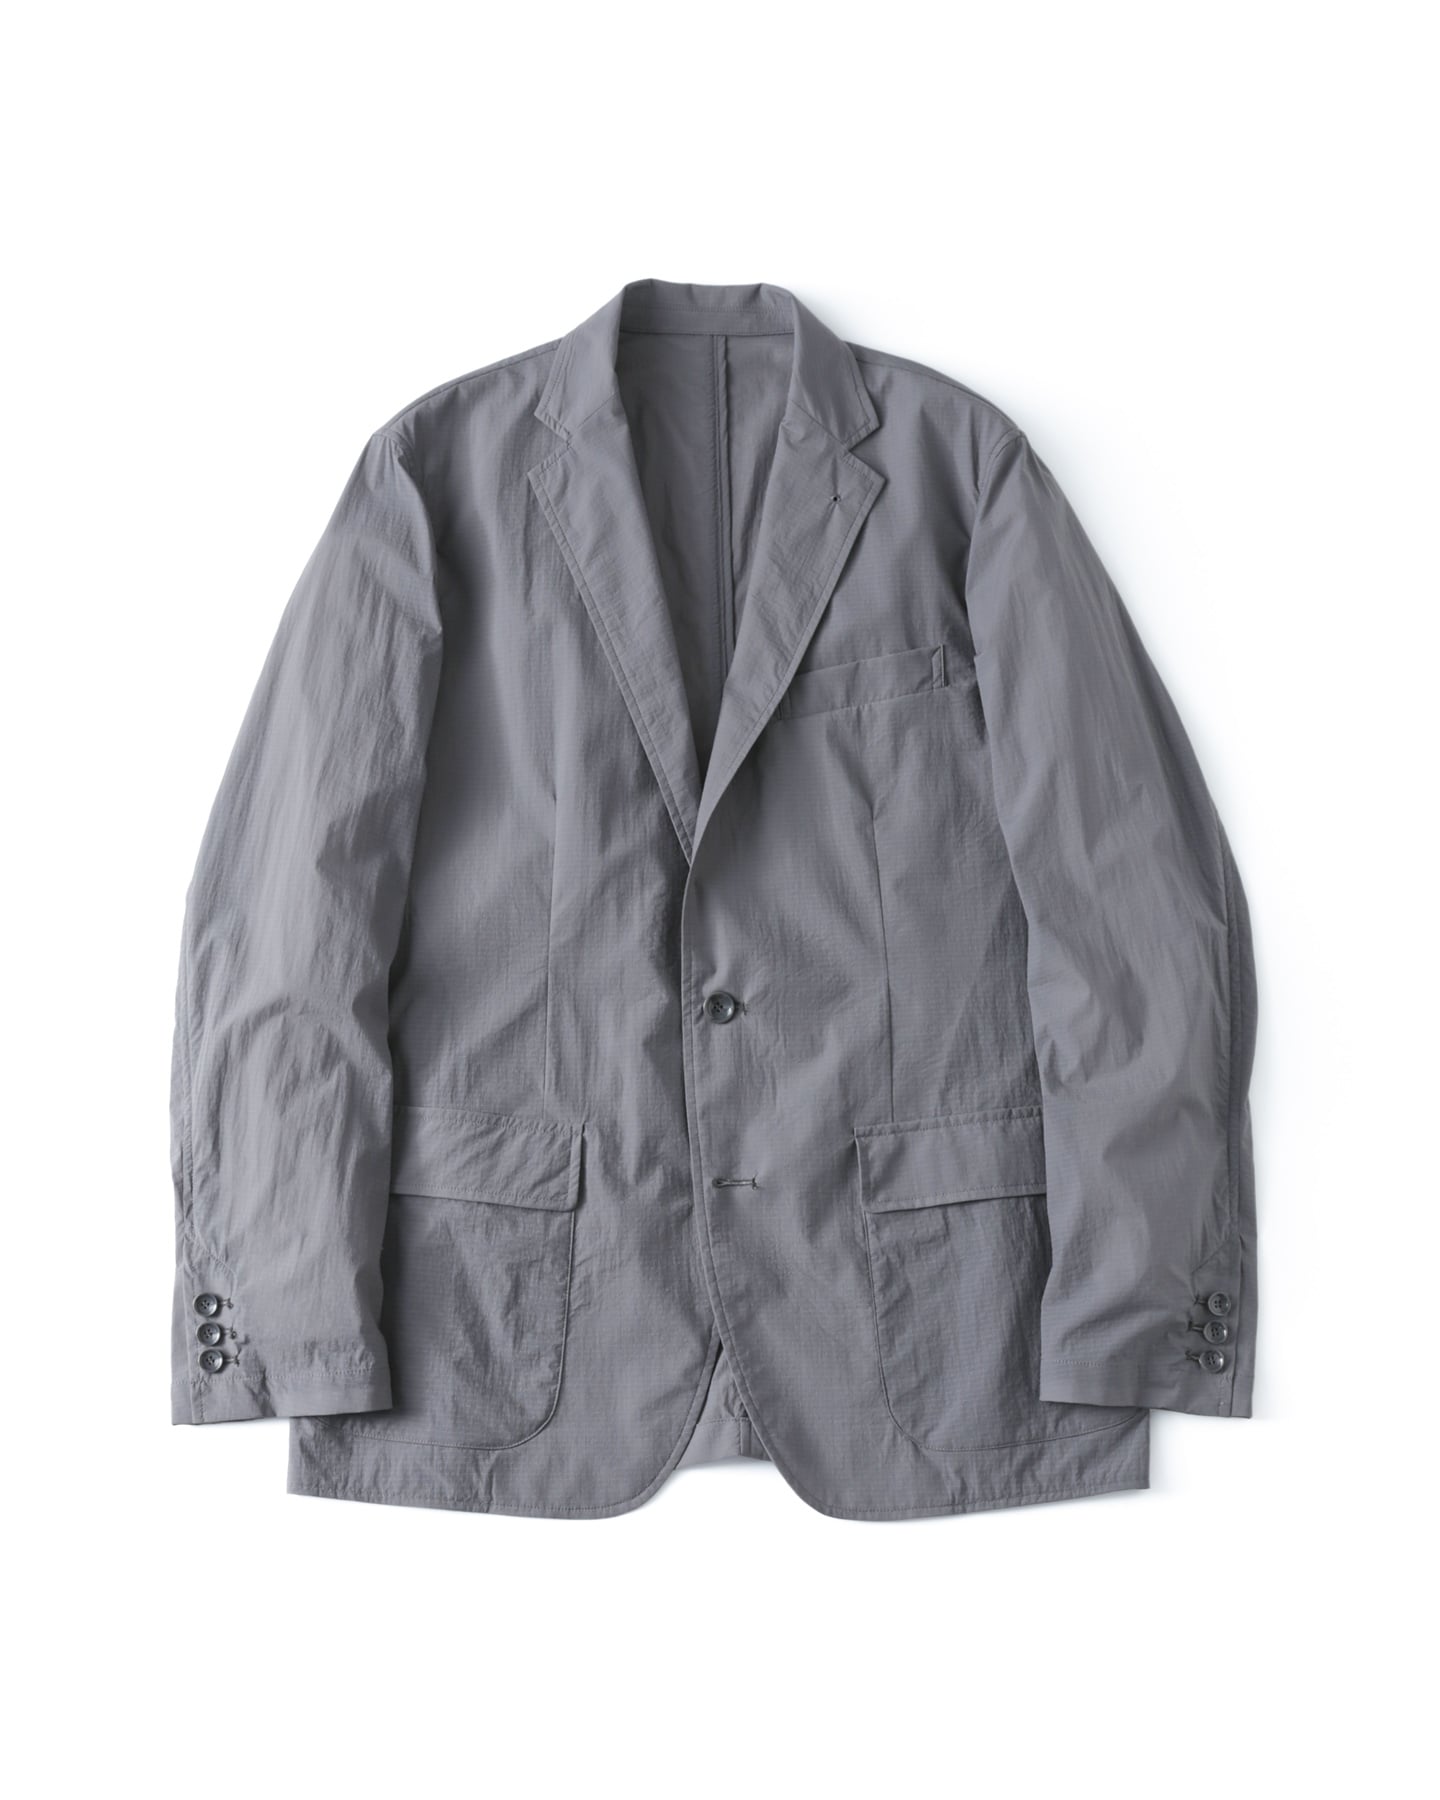 SOPH. | LIGHT WEIGHT STRETCH RIP STOP PACKABLE 2B JACKET(XL GRAY):